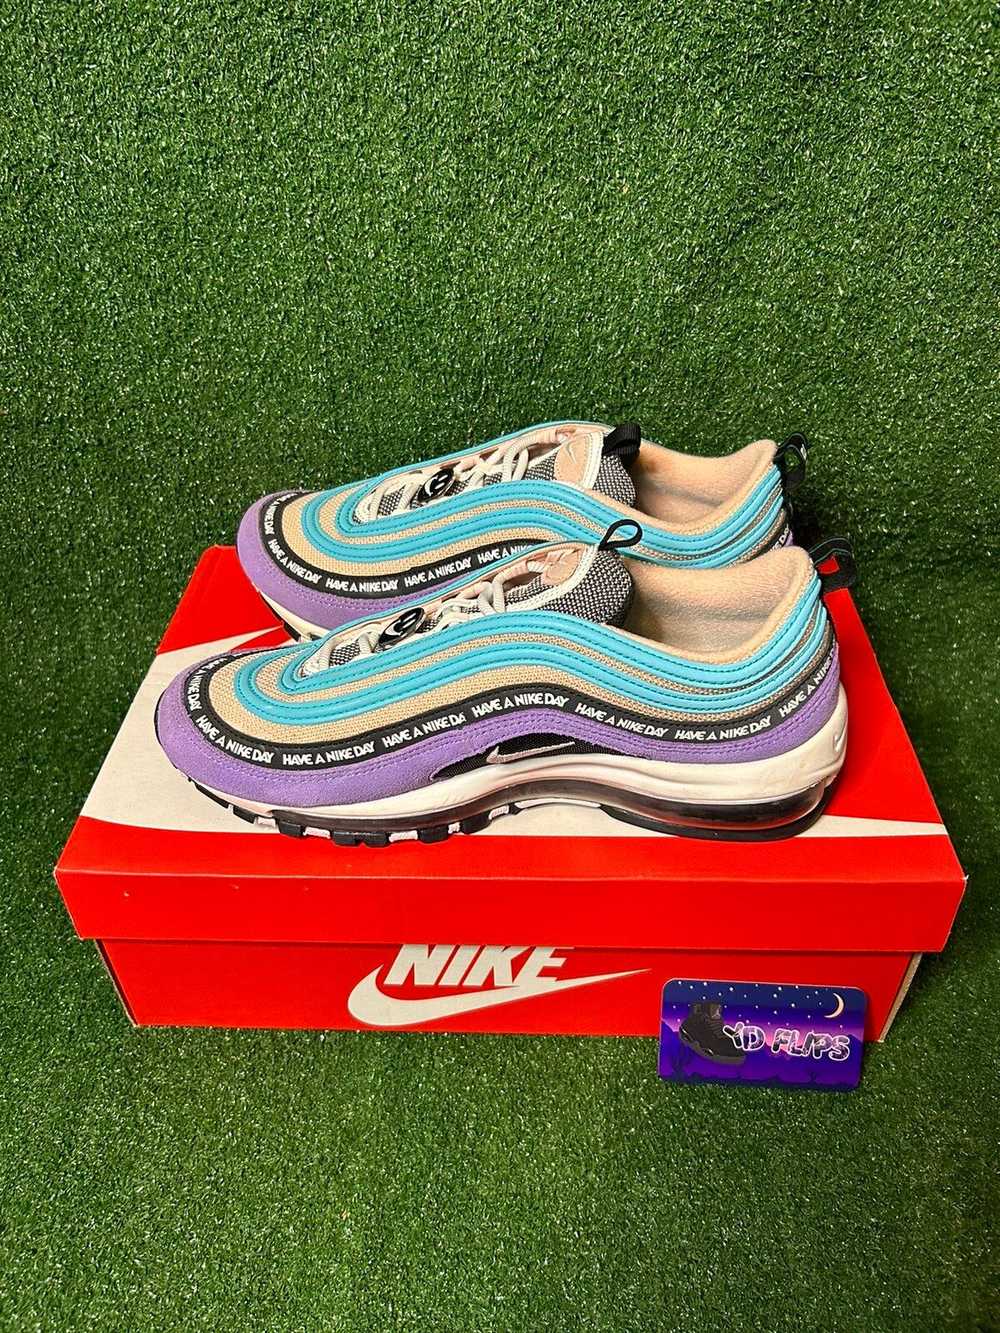 Nike Have a Nike Day Airmax 97 Size 8/9.5w - image 2